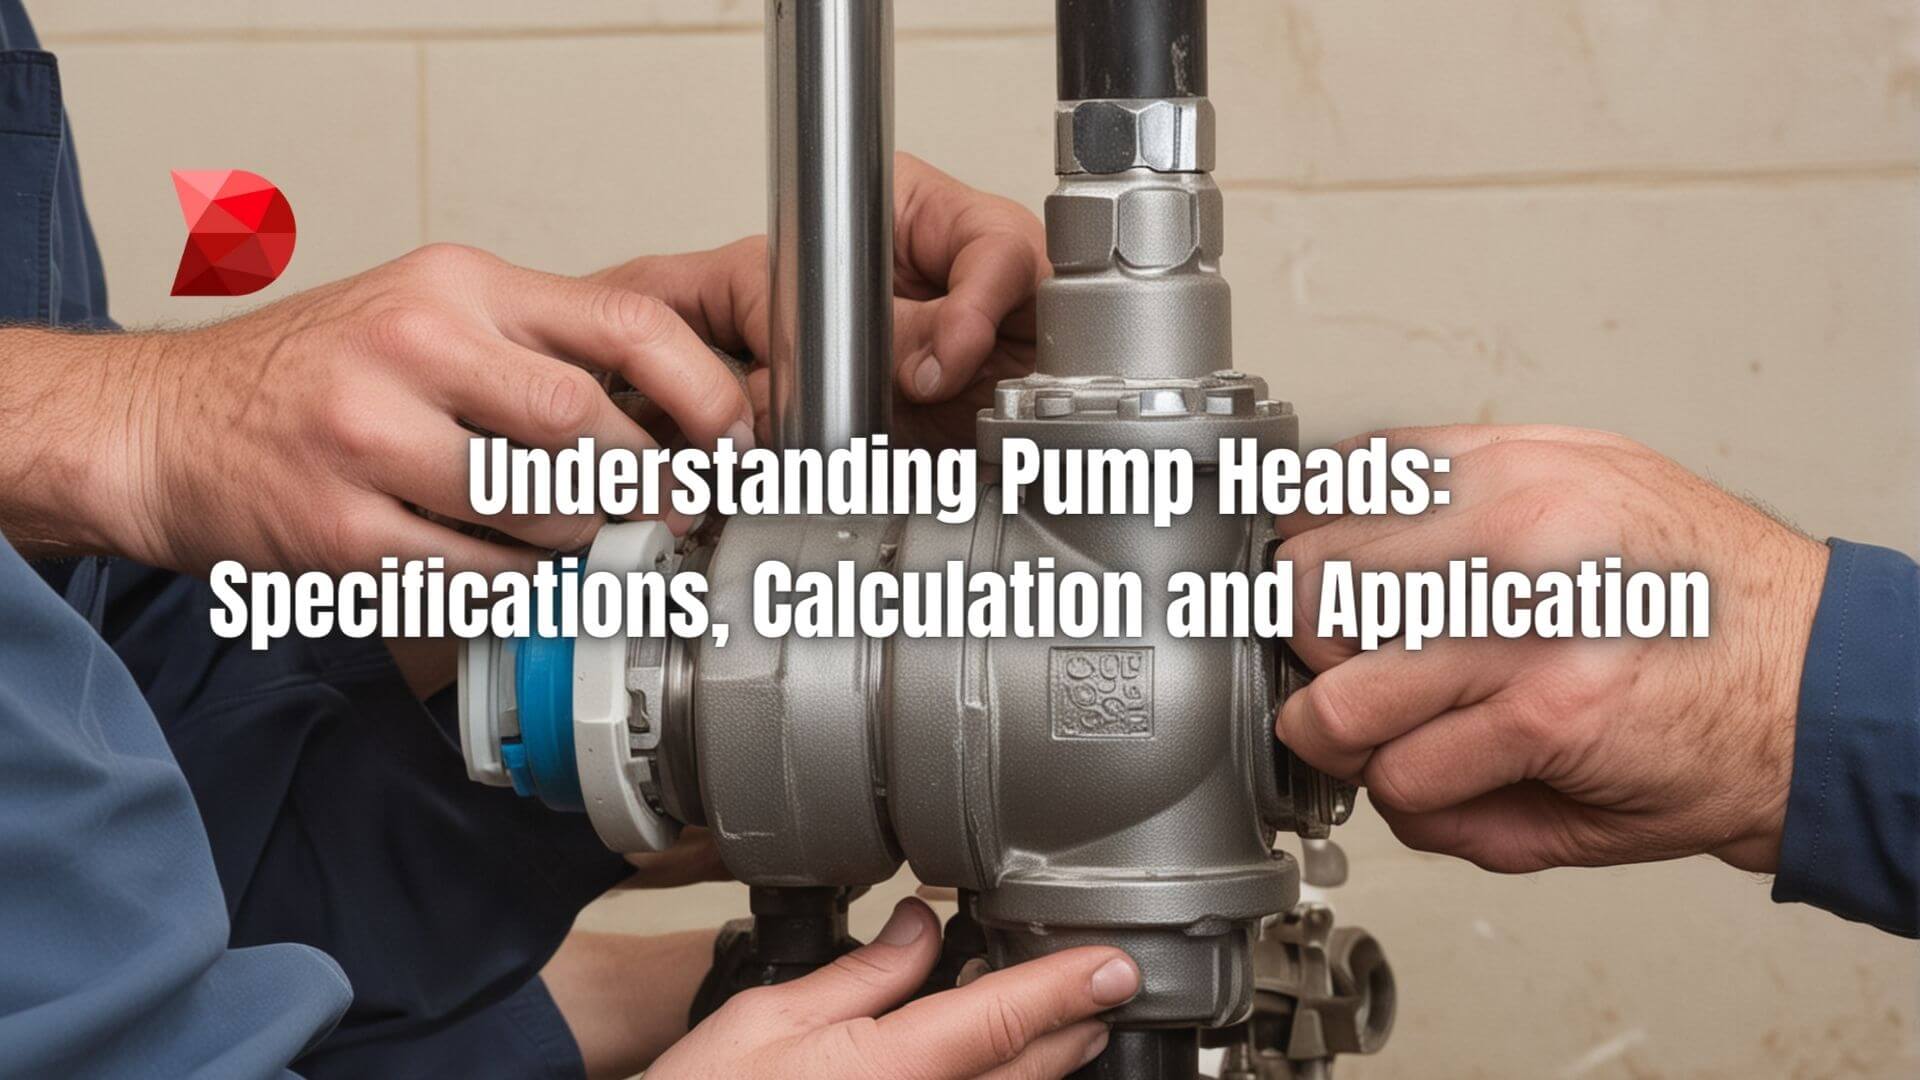 Demystify pump head intricacies with our guide! Click here to learn about the specifications, calculations, and practical applications.